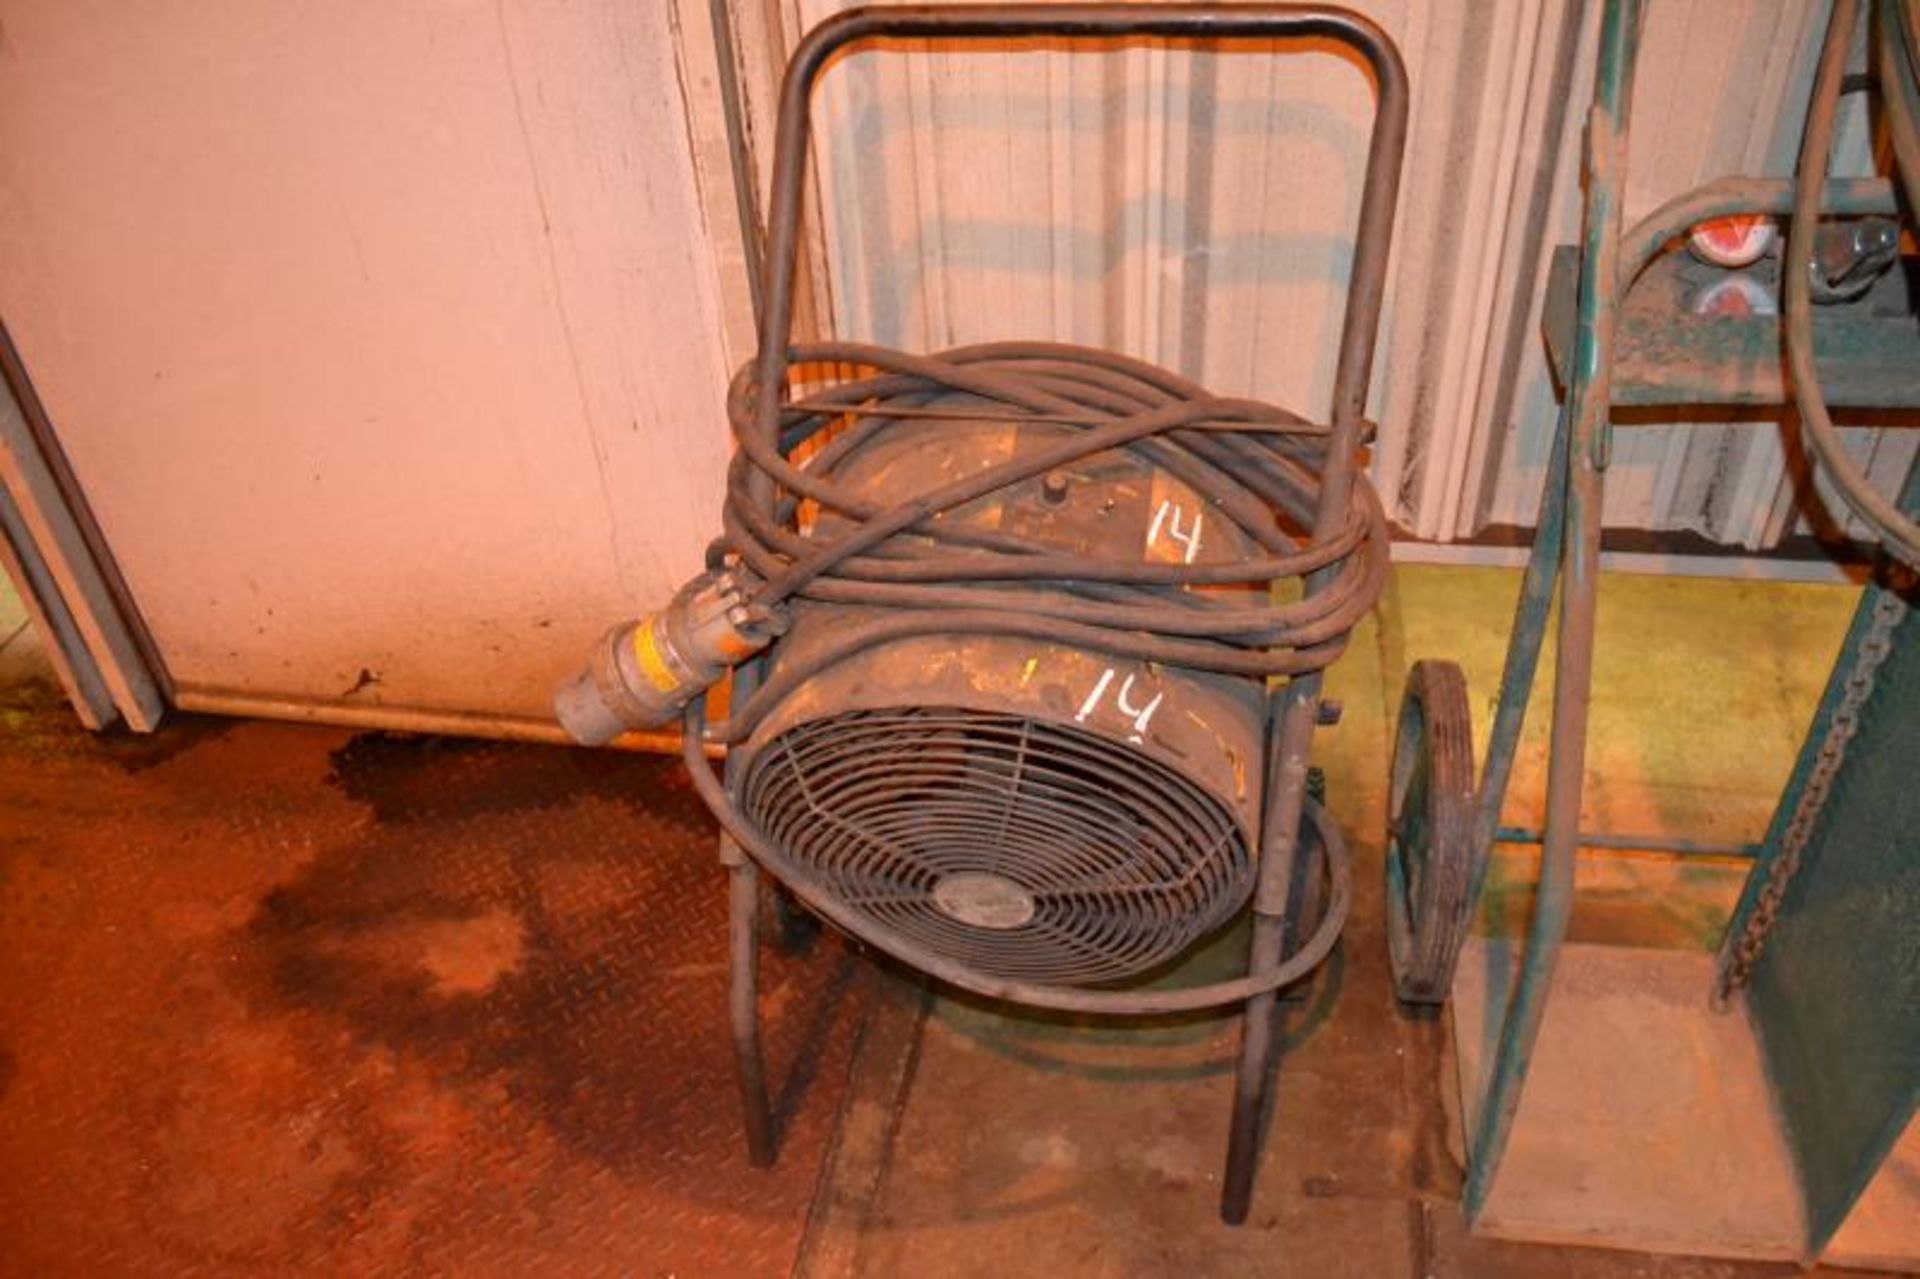 3 PHASE ELECTRIC HEATER